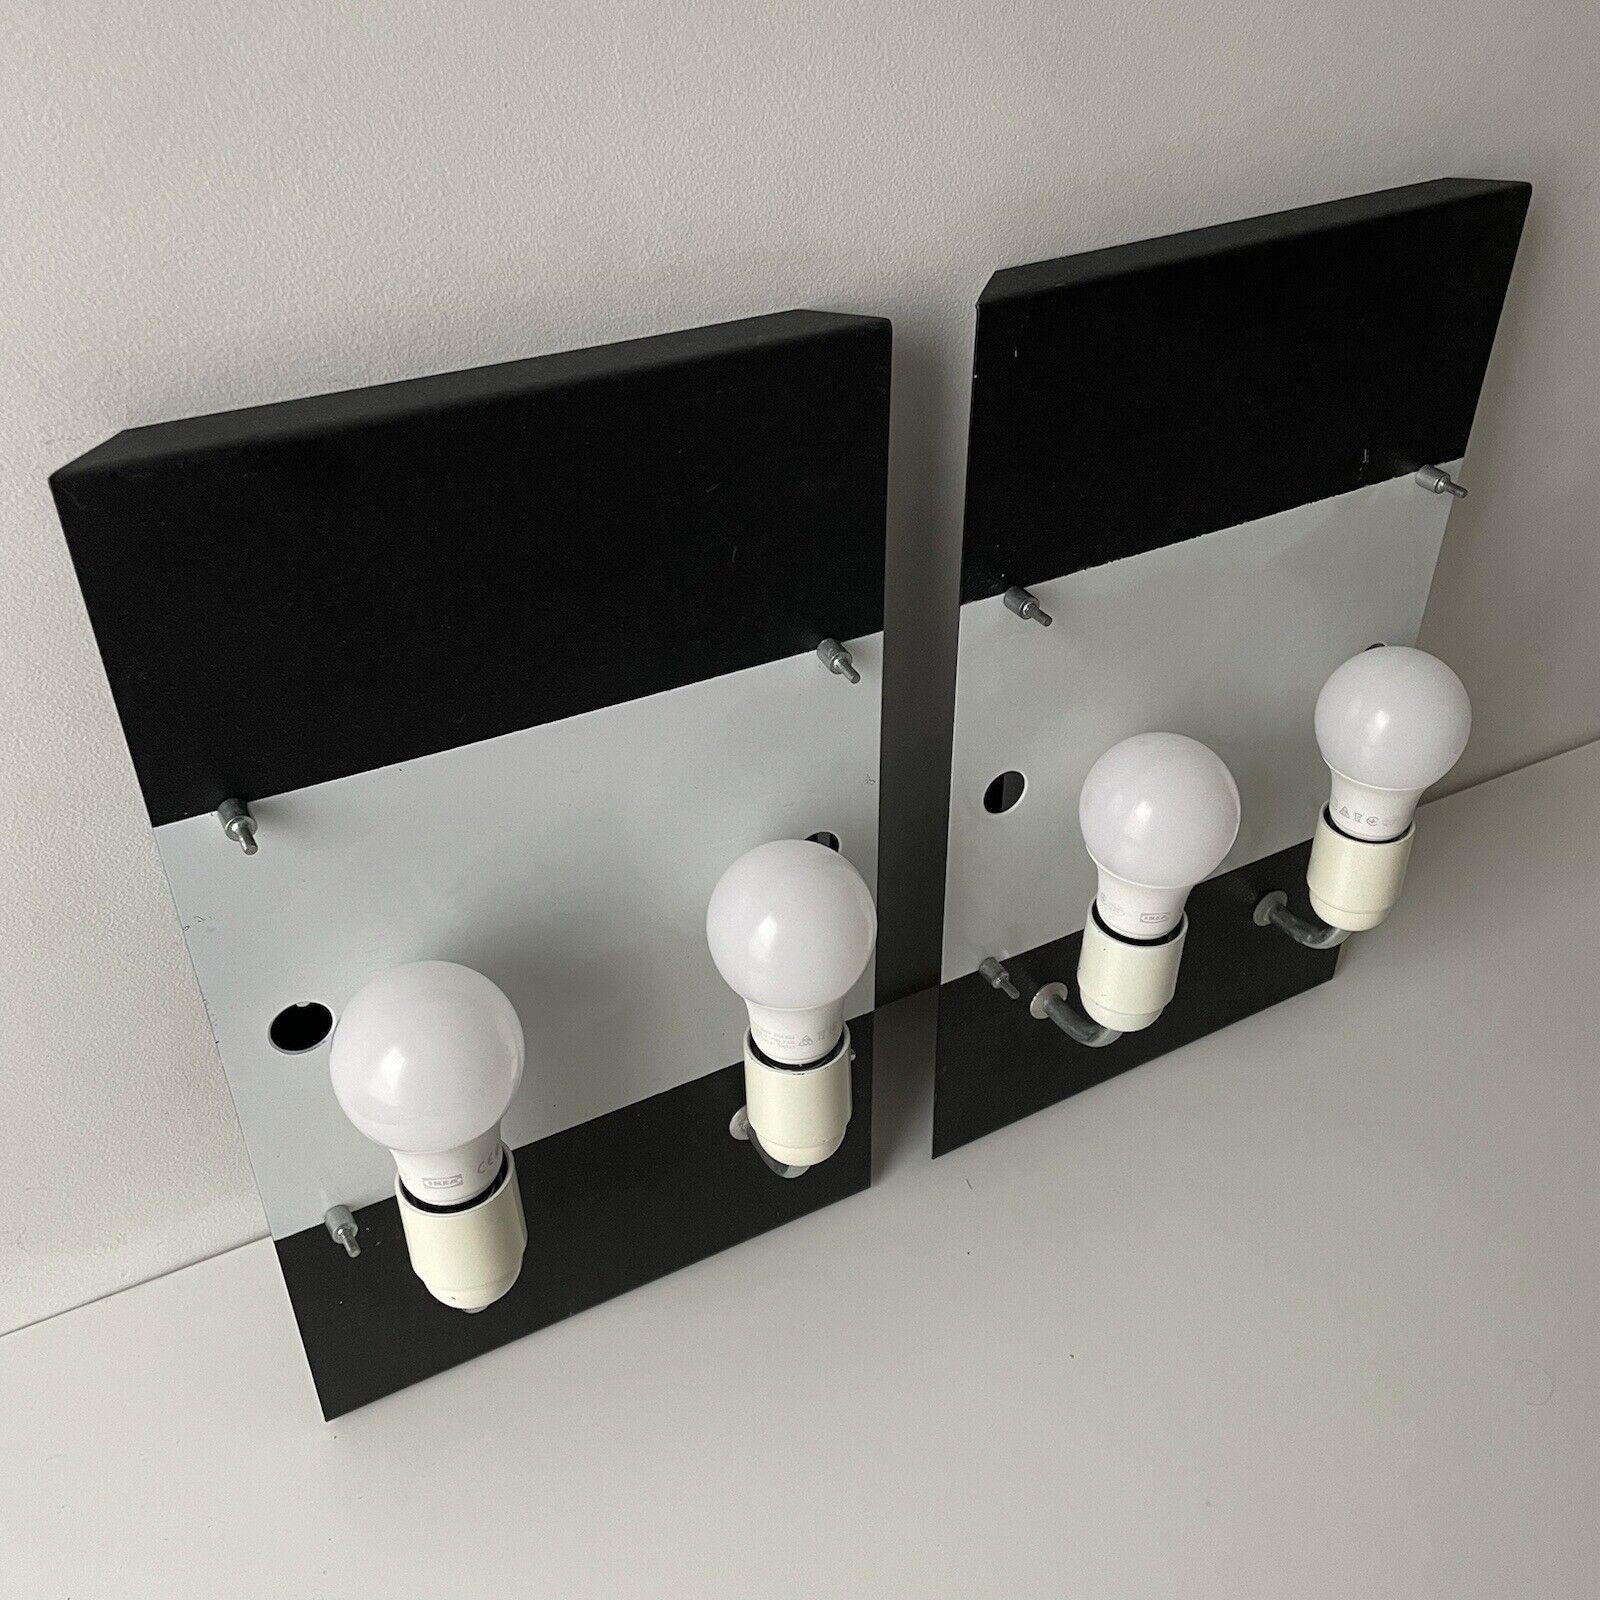 Late 20th Century Accademia Medium Wall Lamp by Cini Boeri for Artemide 1978